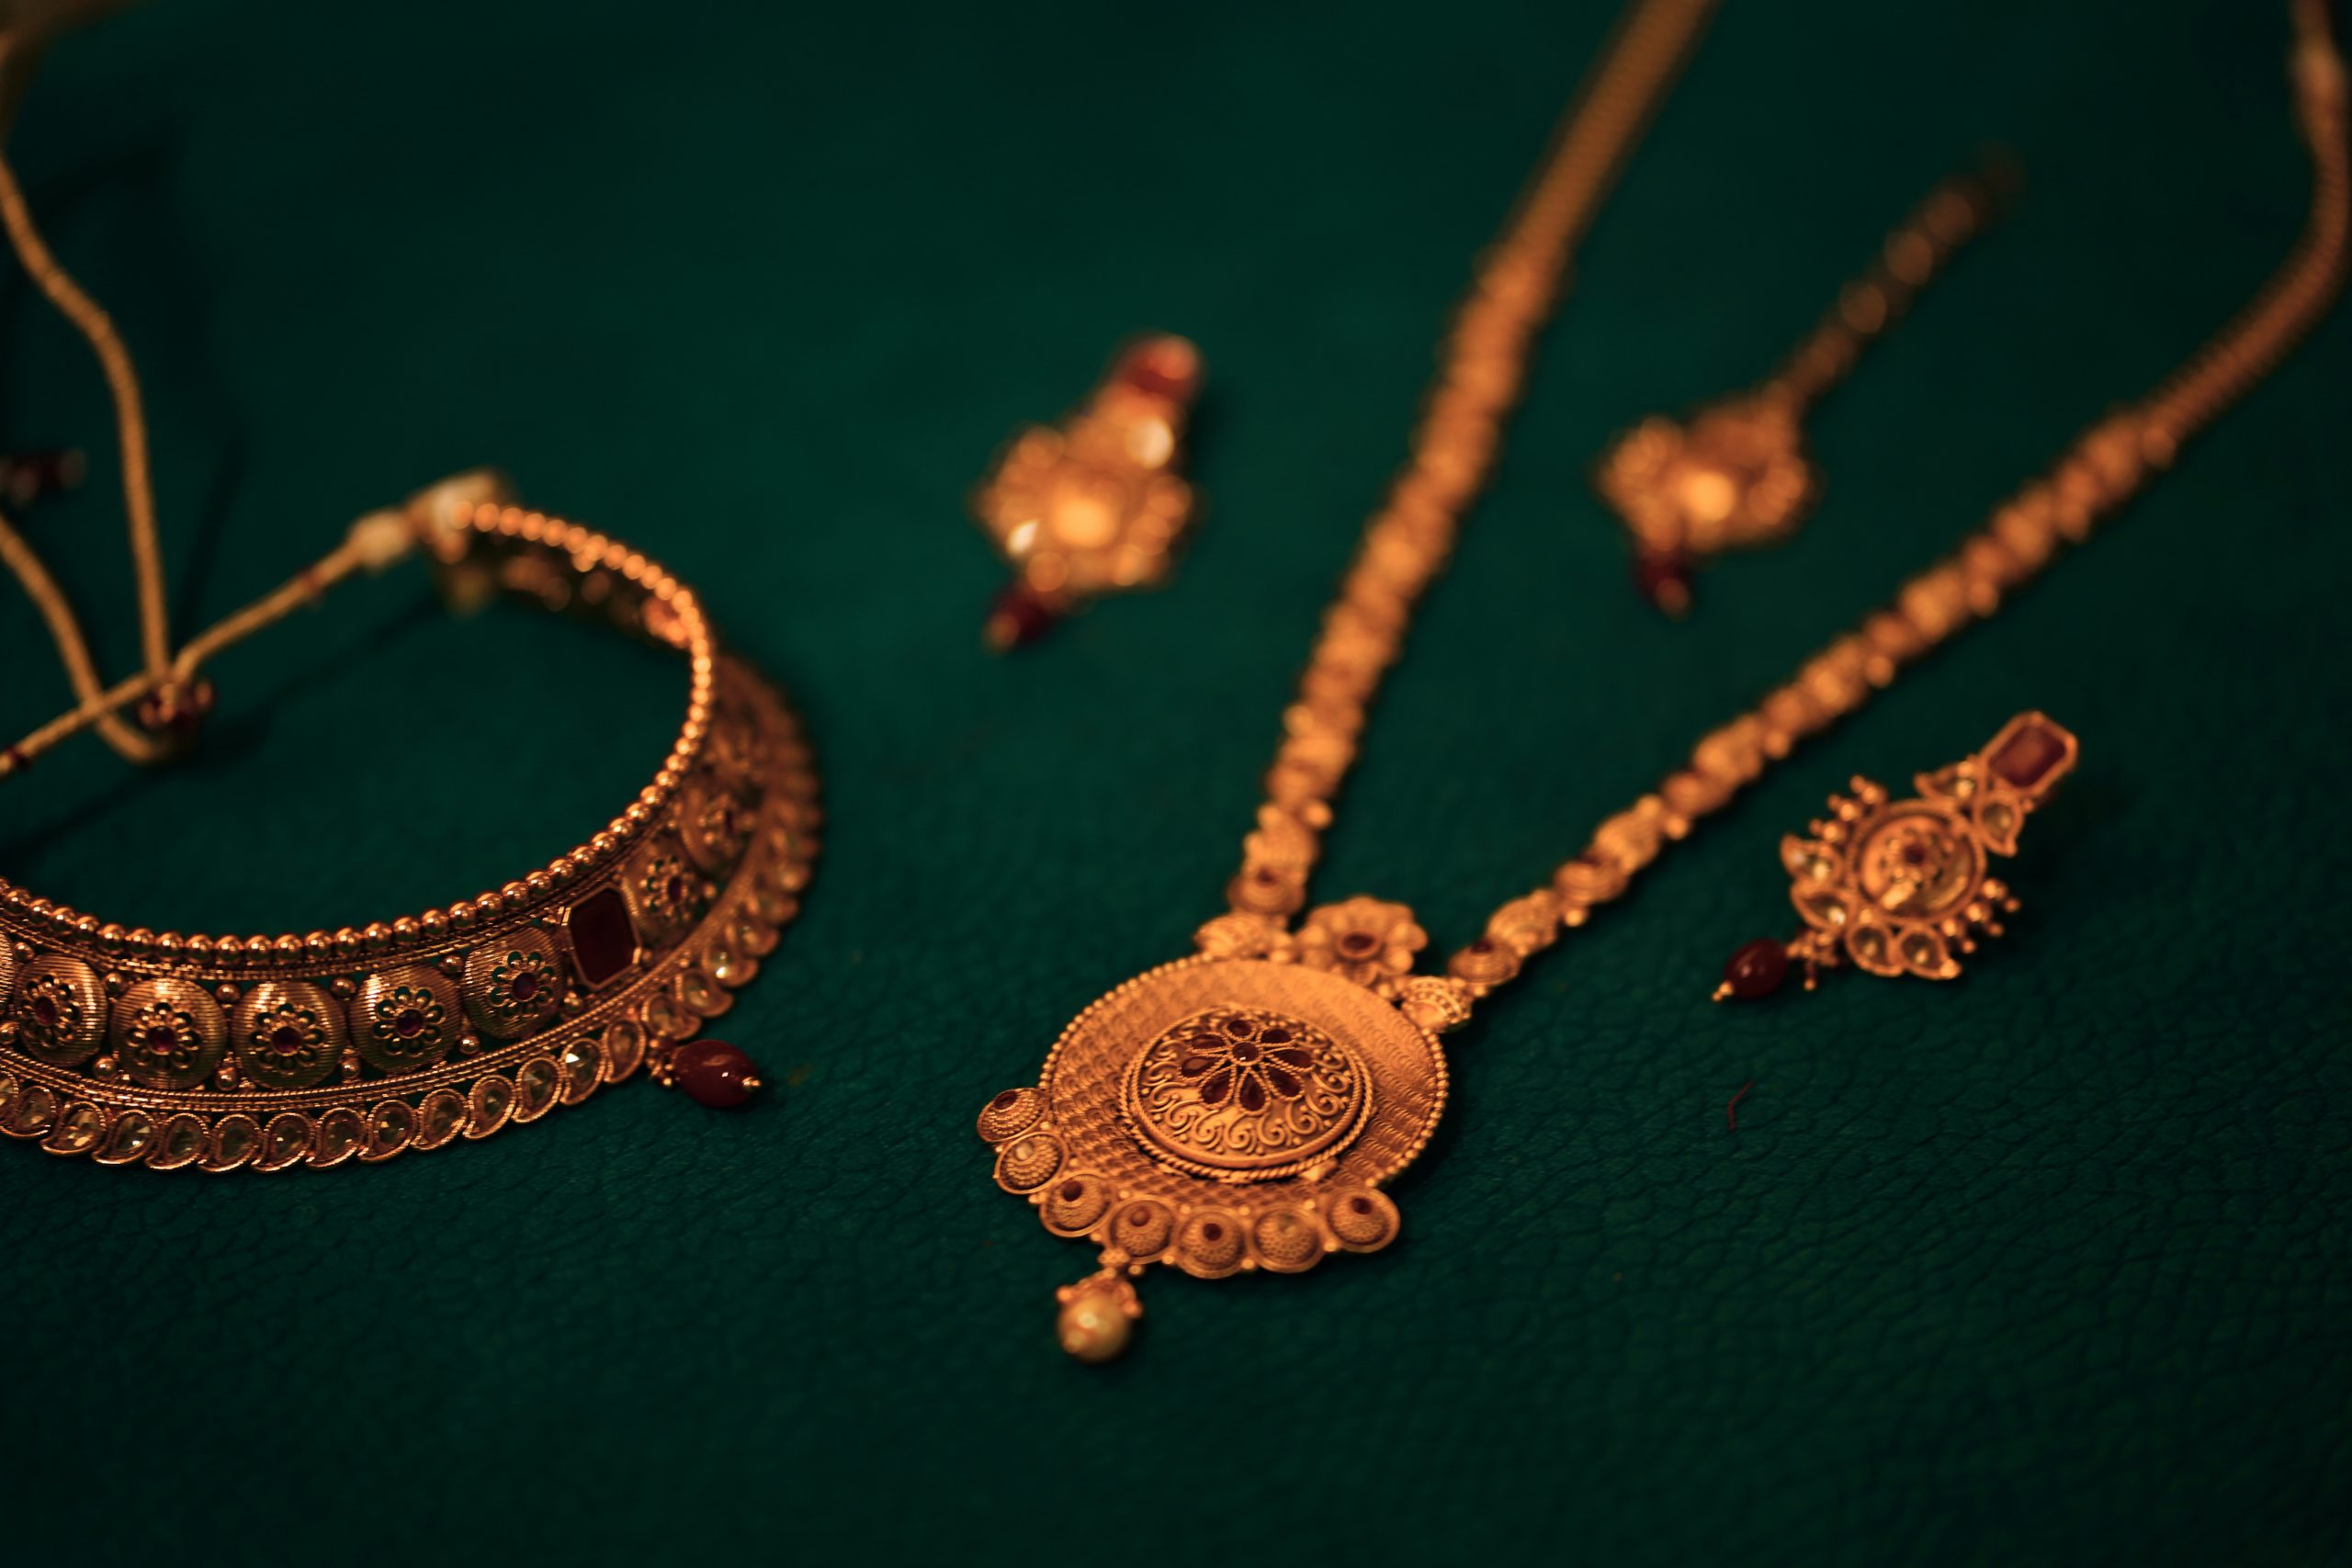 Antique gold necklaces and earrings against a dark green background